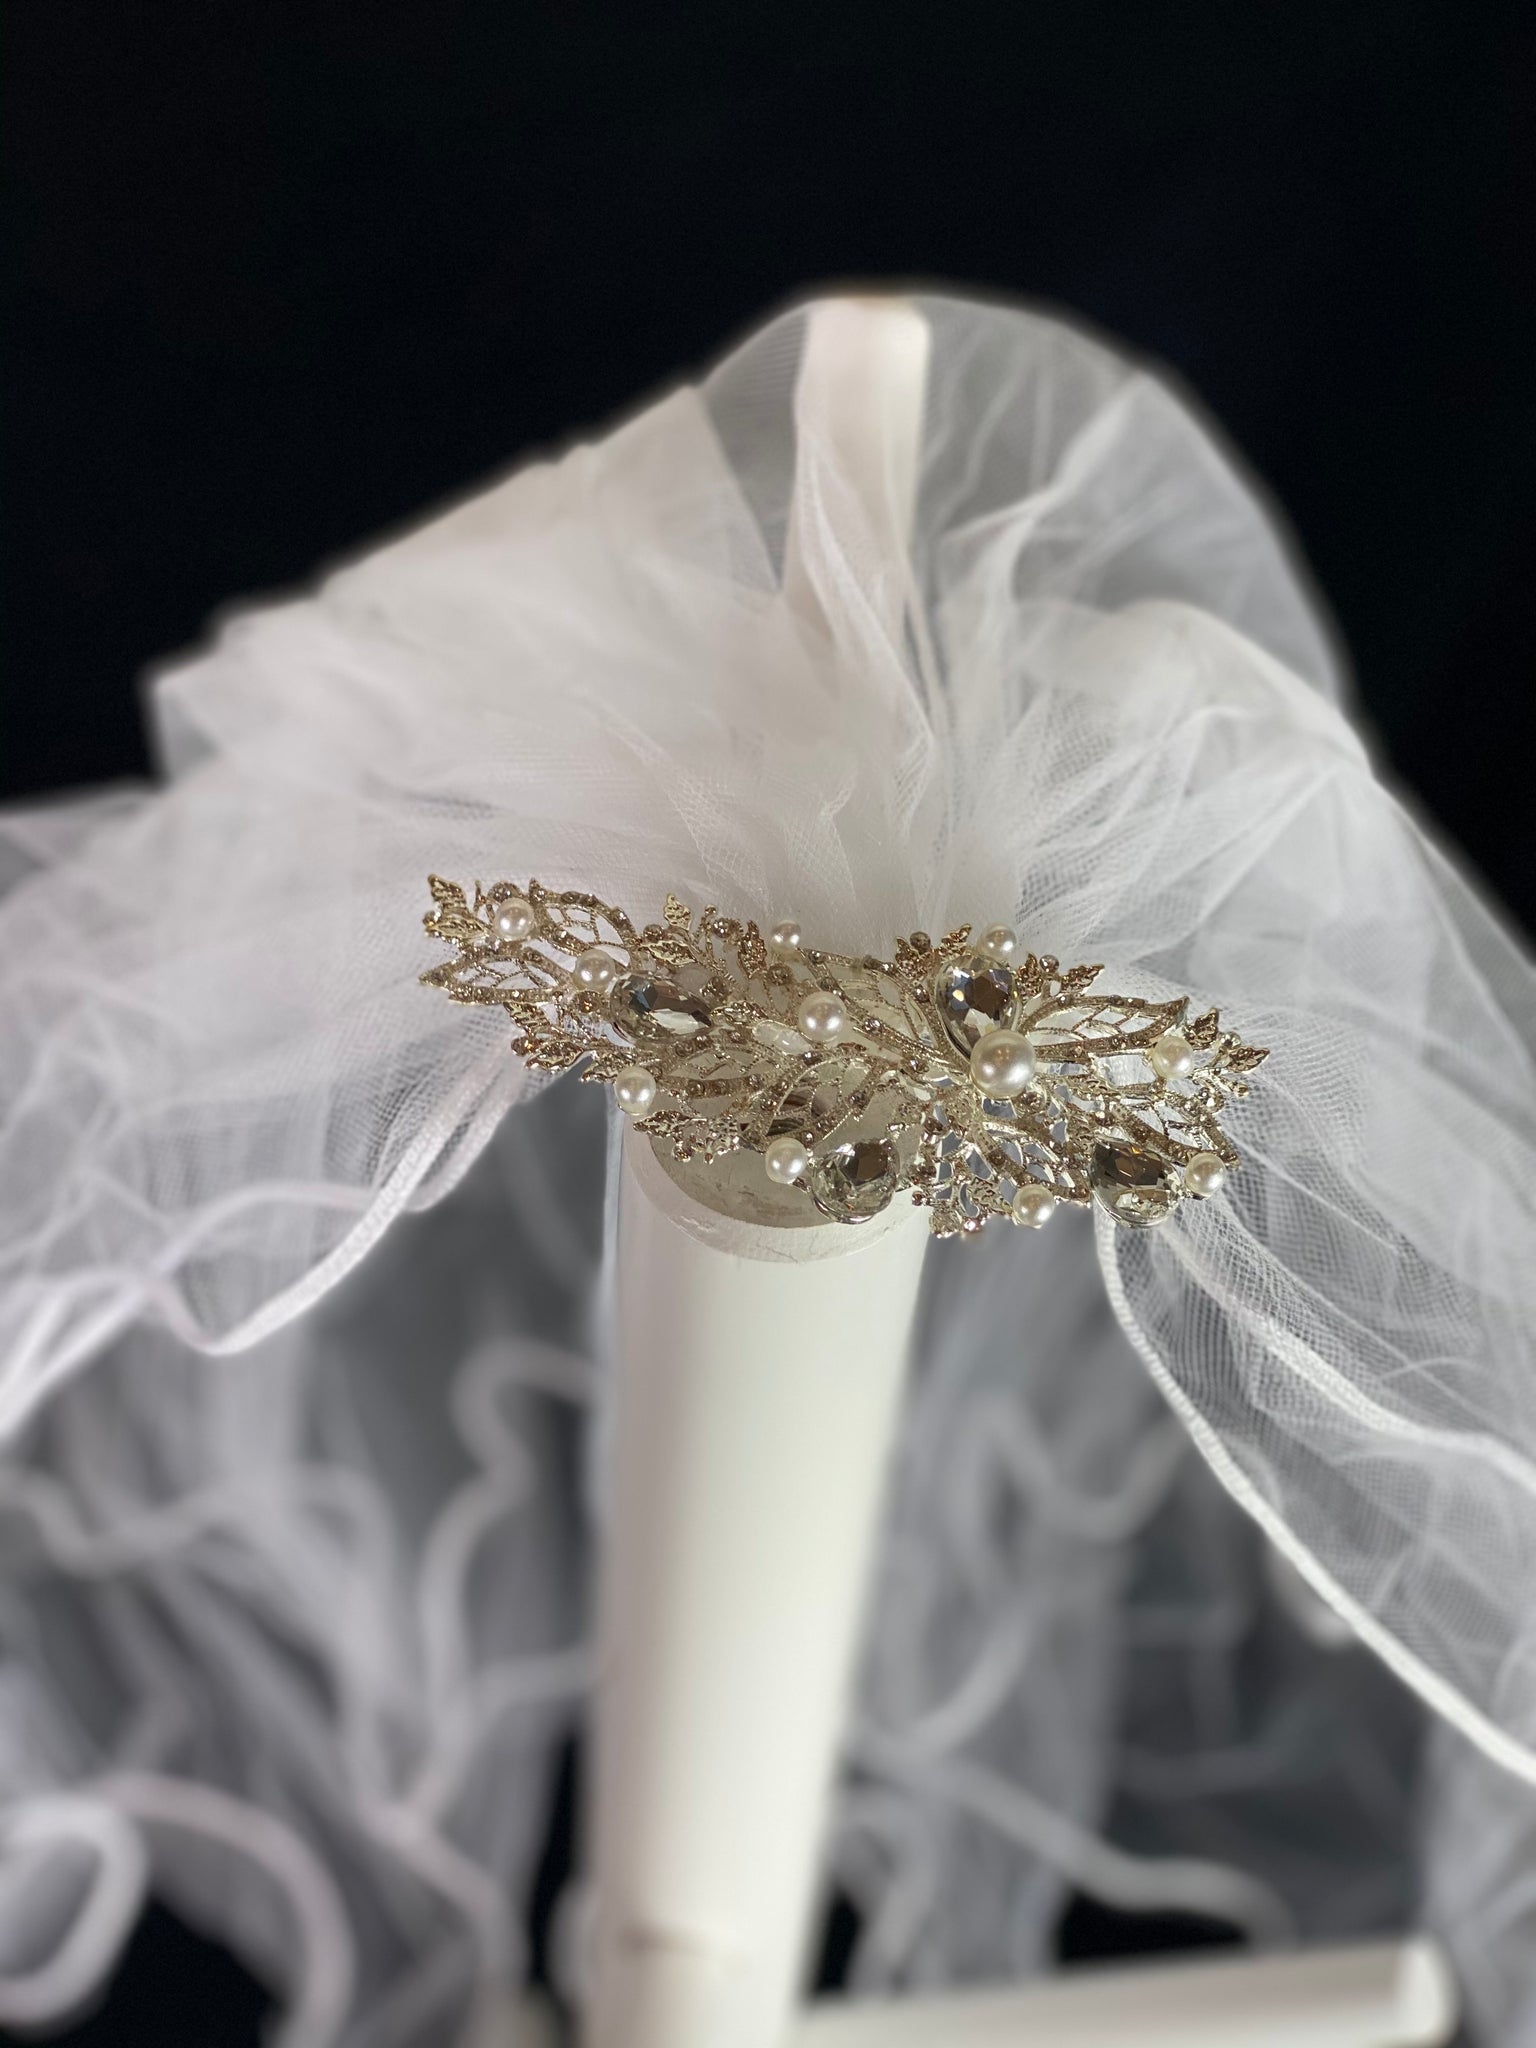 White Elegant First Communion Veil on Decorative Comb with pearls and rhinestones.  Elegant soft 2 layer tulle veil with delicate hand stitched braided satin trim around the edge and handmade decorative comb with pearl and rhinestone detailing.  This double layered veil reaches approximately 21" long. Veil has 1.5" long, 2" wide, metal comb tiara to secure it in place. 